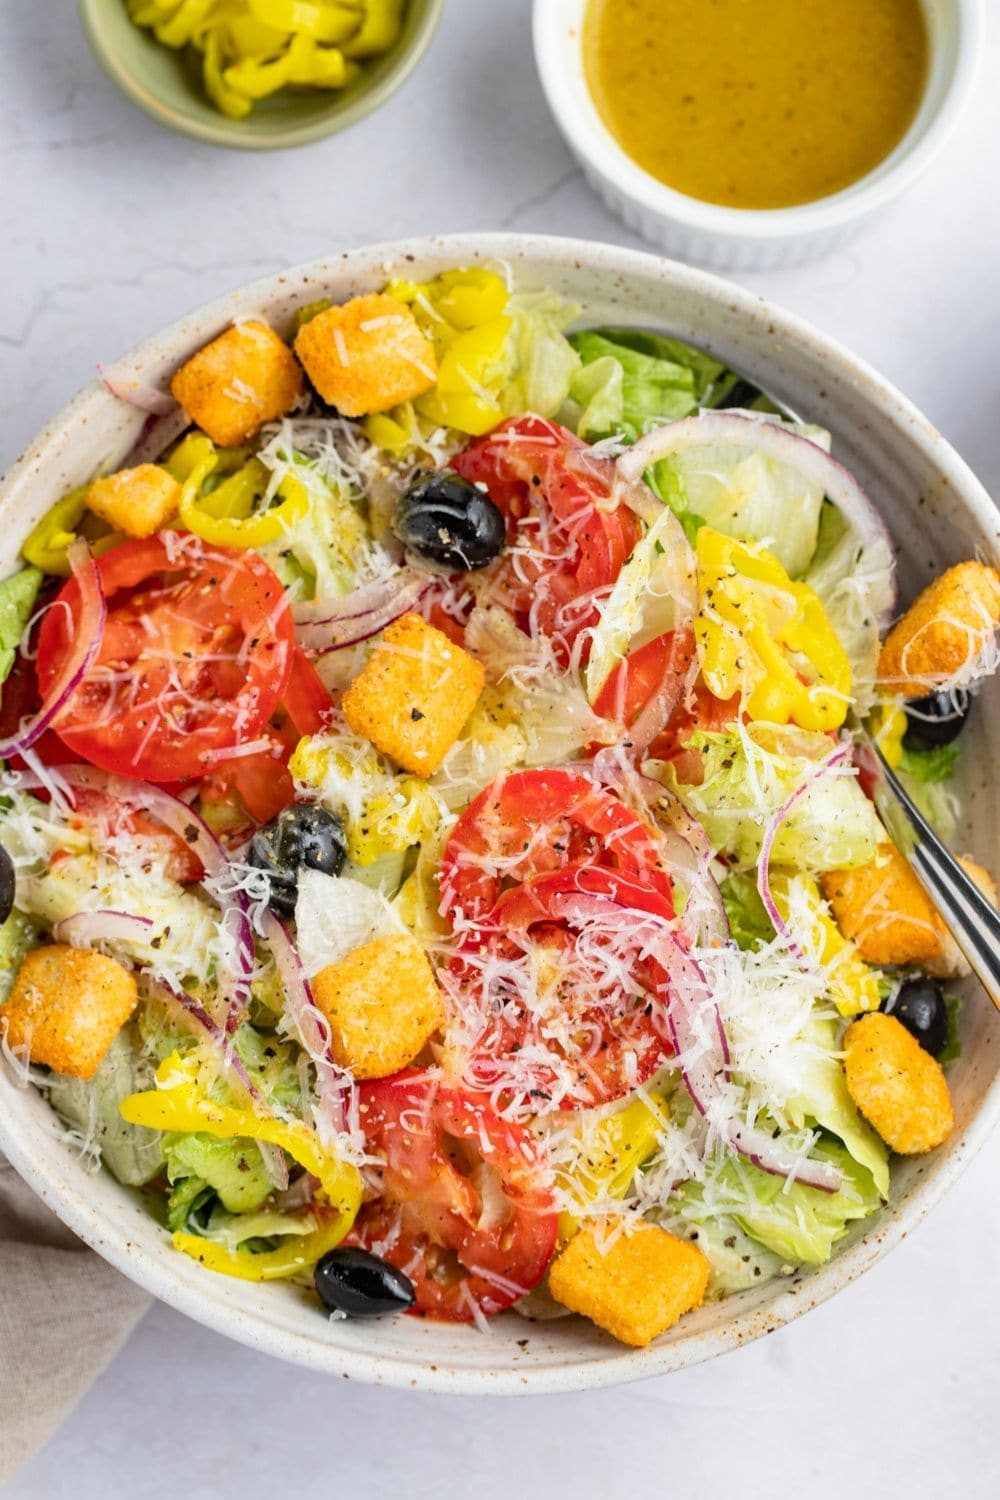 https://insanelygoodrecipes.com/wp-content/uploads/2021/11/Homemade-Olive-Garden-Salad-in-a-Bowl-with-Dressing.jpg